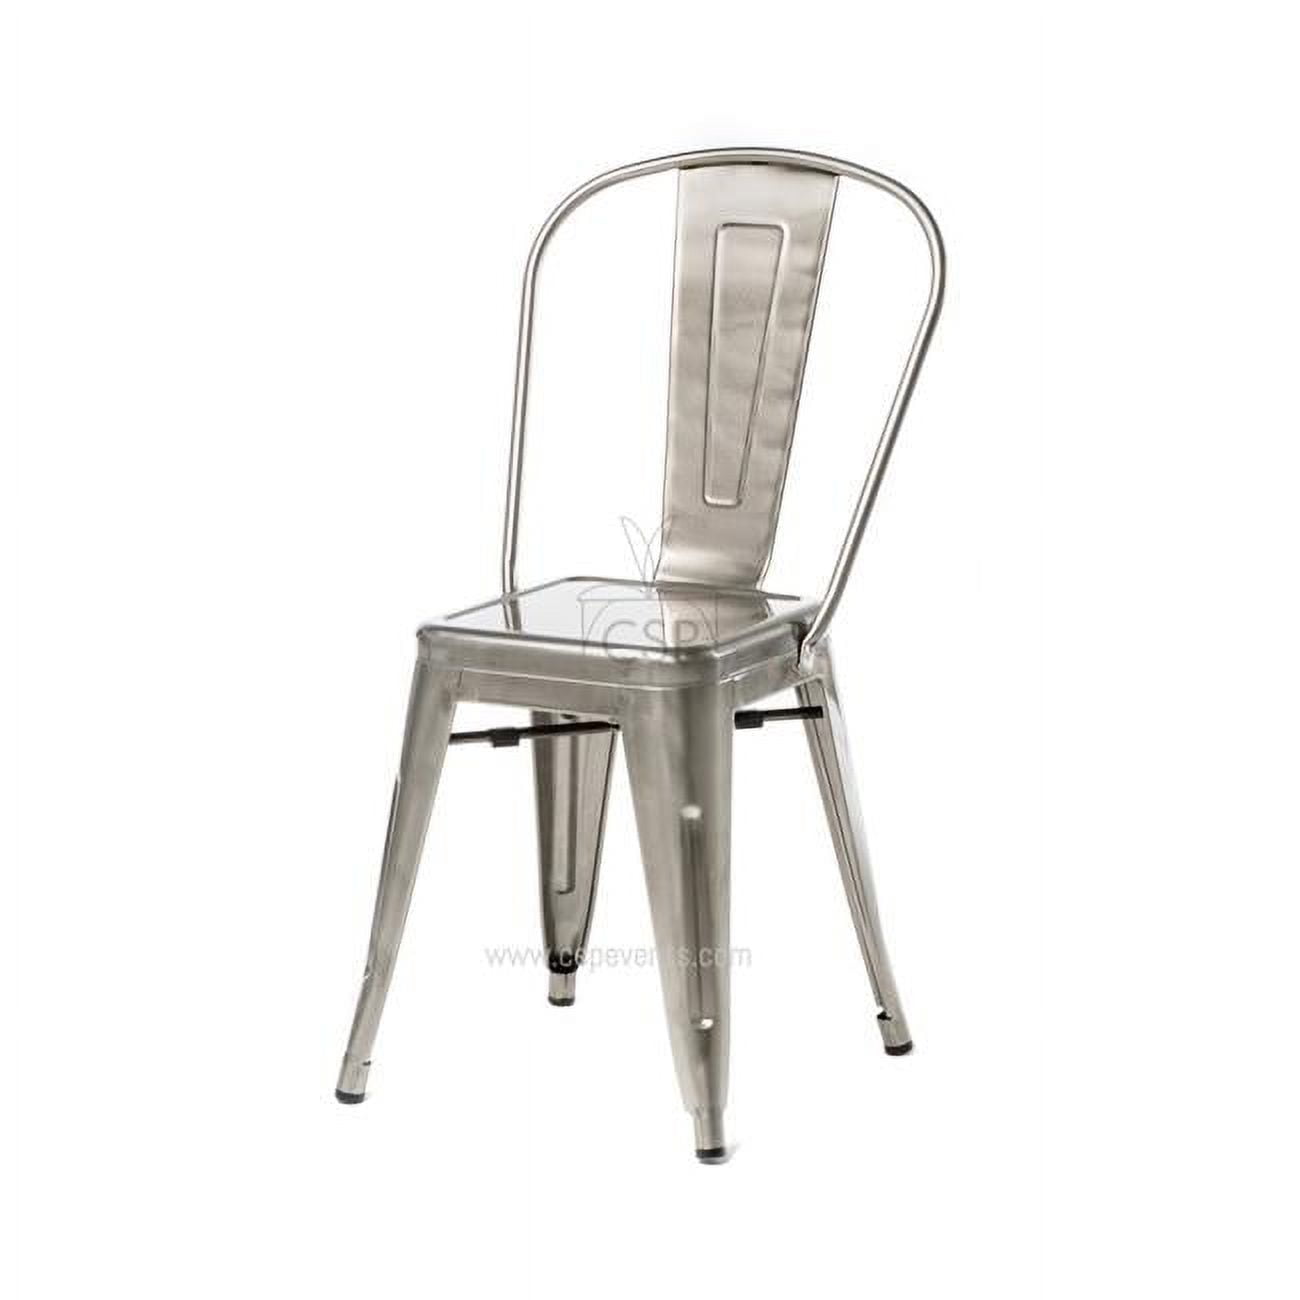 Mo-101-bgn1-4 Oscar Steel Powder Coated Stackable Armless Chair - Brushed Gun Metal - 34.5 In. - Set Of 4